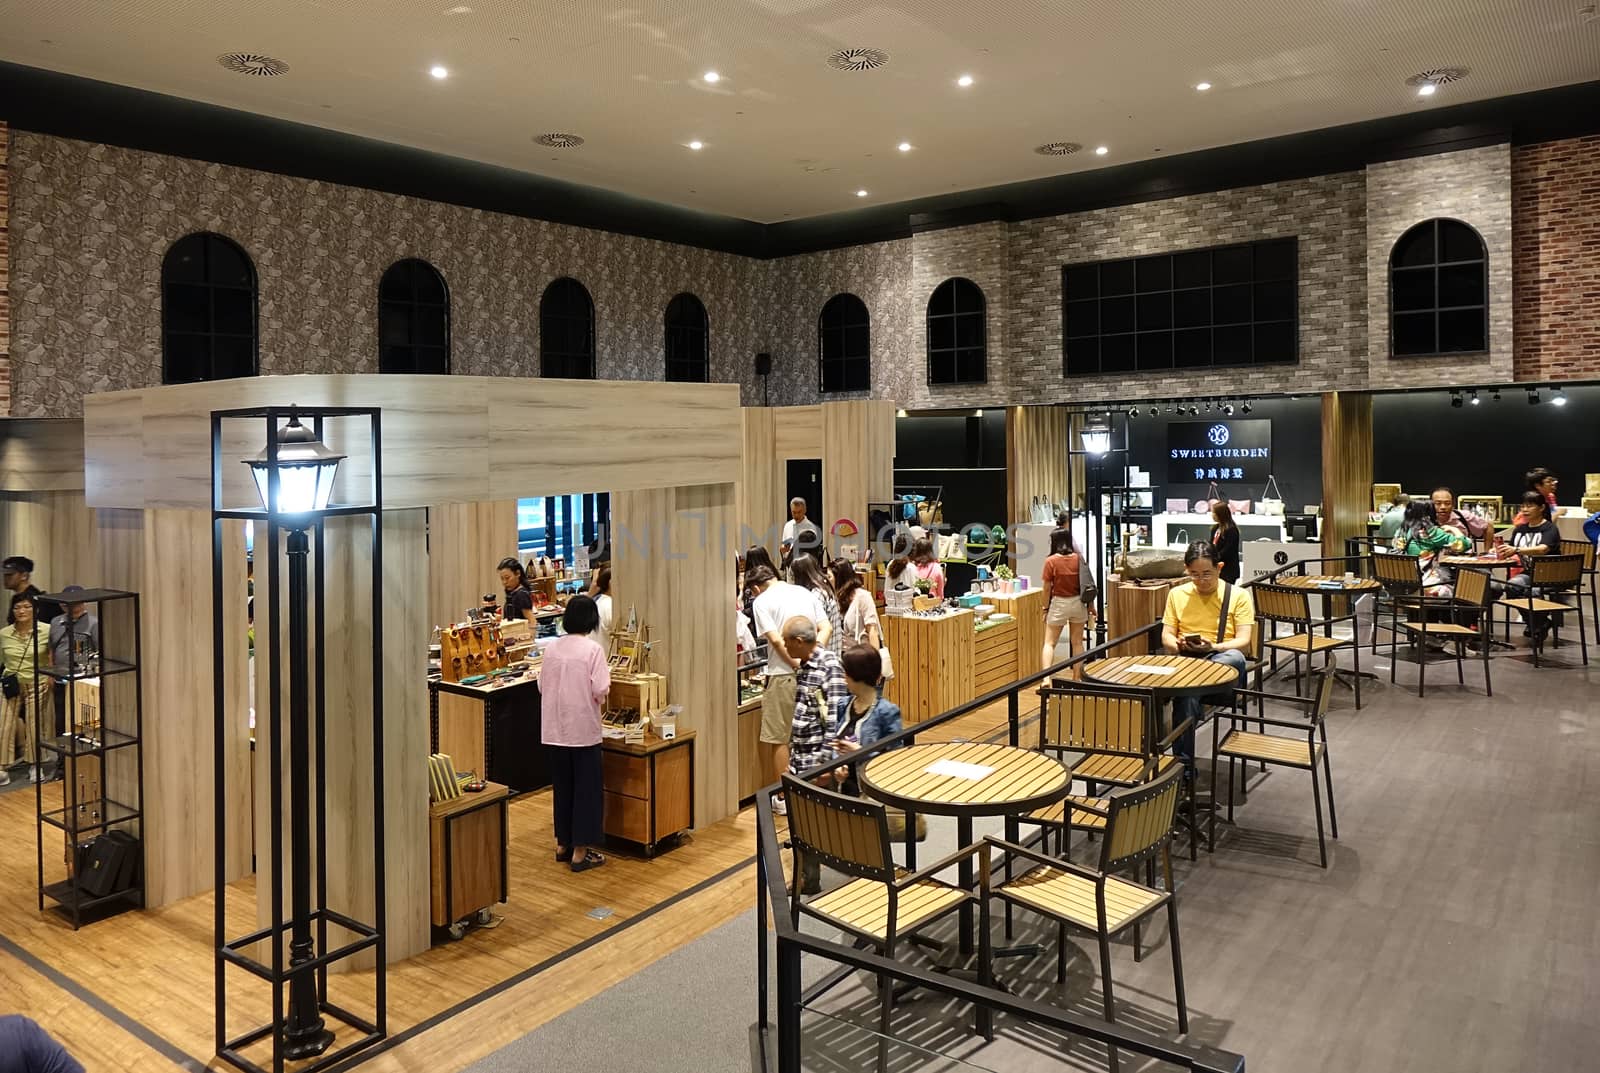 KAOHSIUNG, TAIWAN -- APRIL 14, 2019: A coffee shop inside the recently completed National Center for the Performing Arts located in the Weiwuying Metropolitan Park